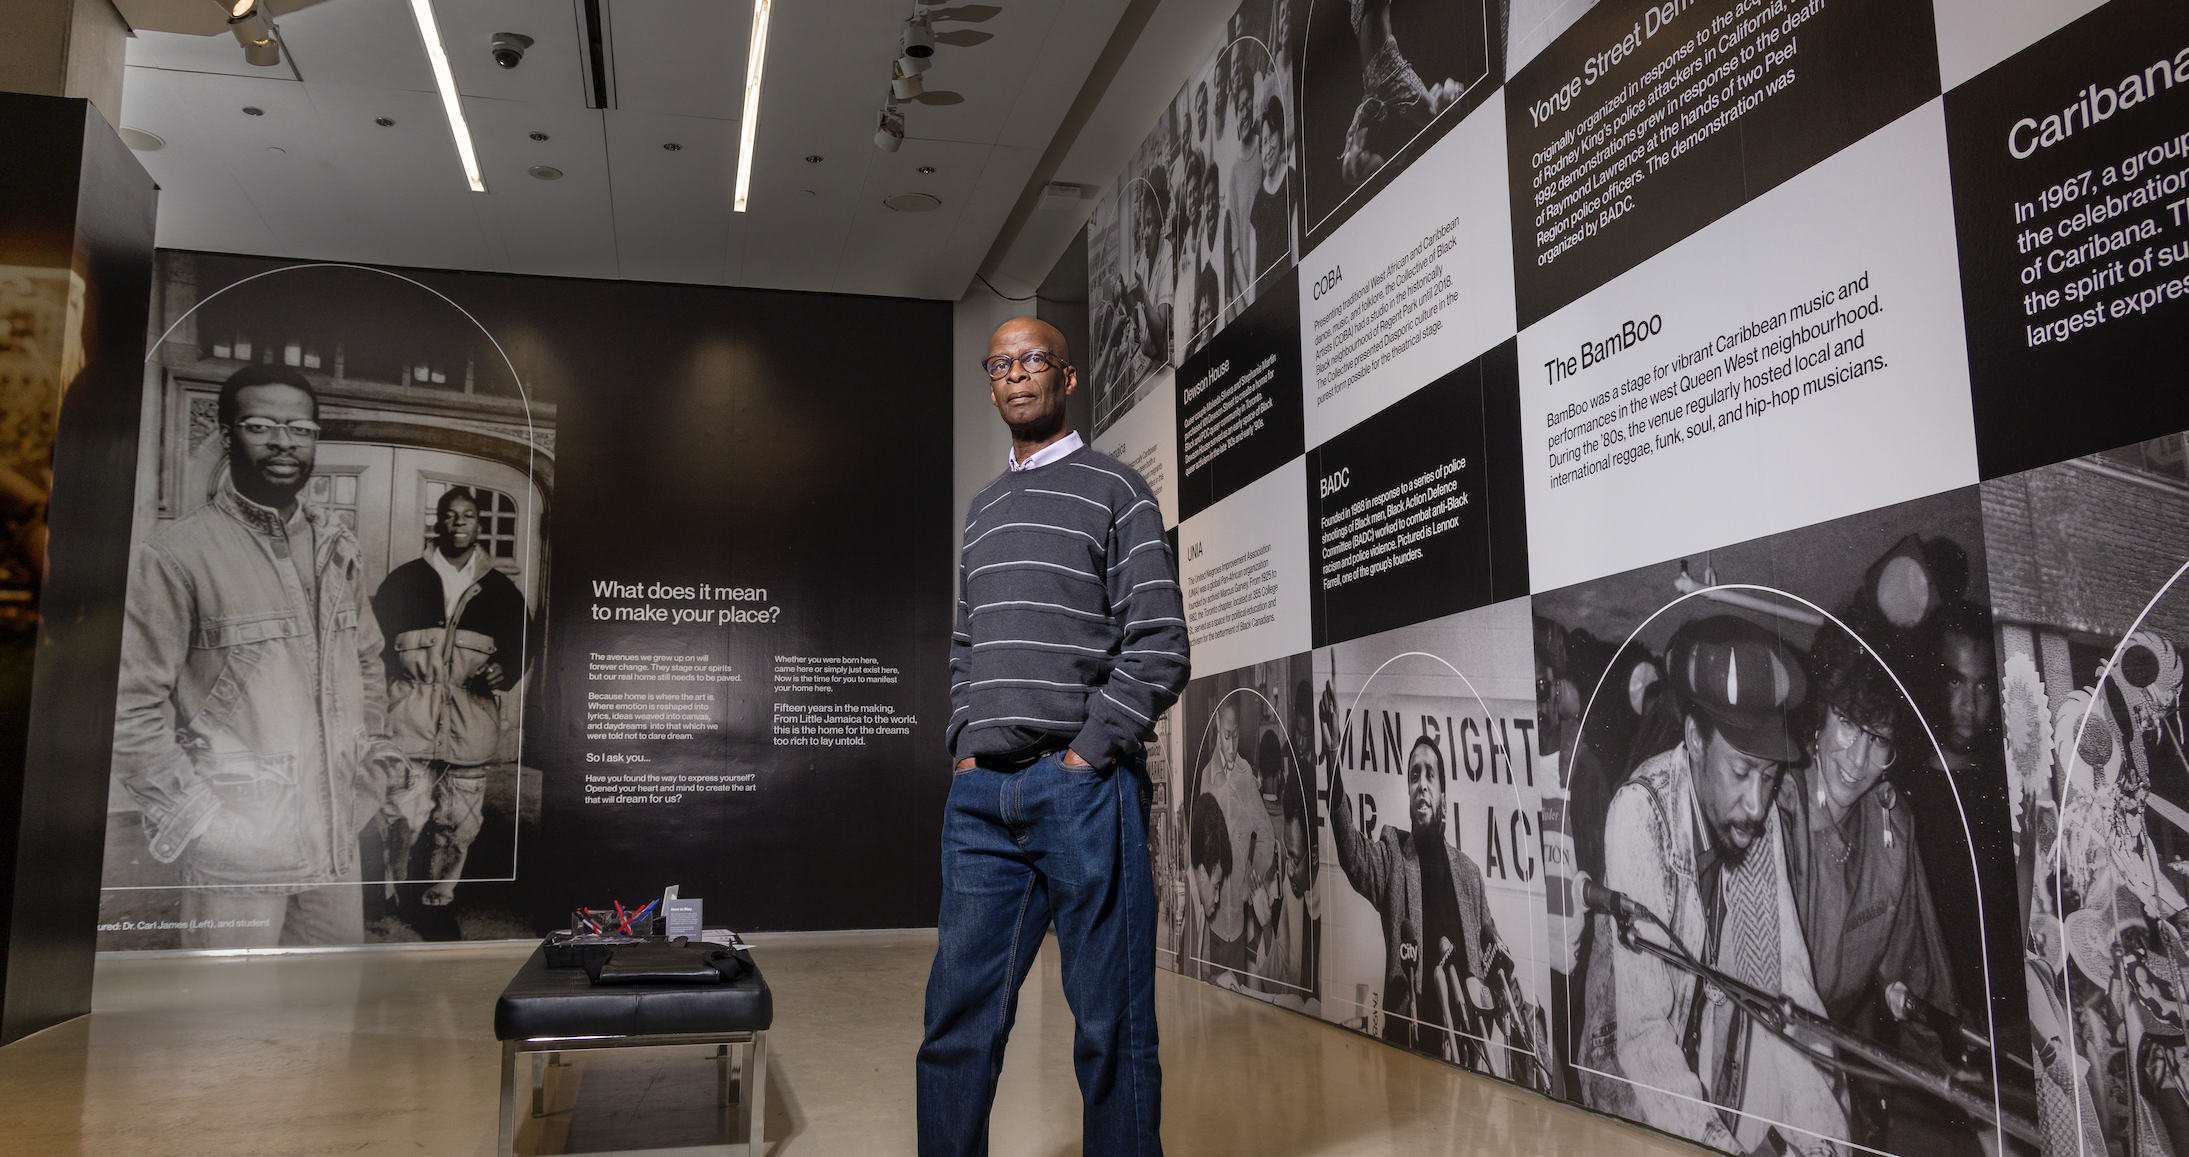 Professor Carl James standing in the lobby at the TIFF Lighbox with large mural images reflecting Black History in Toronto displayed on the walls of the lobby